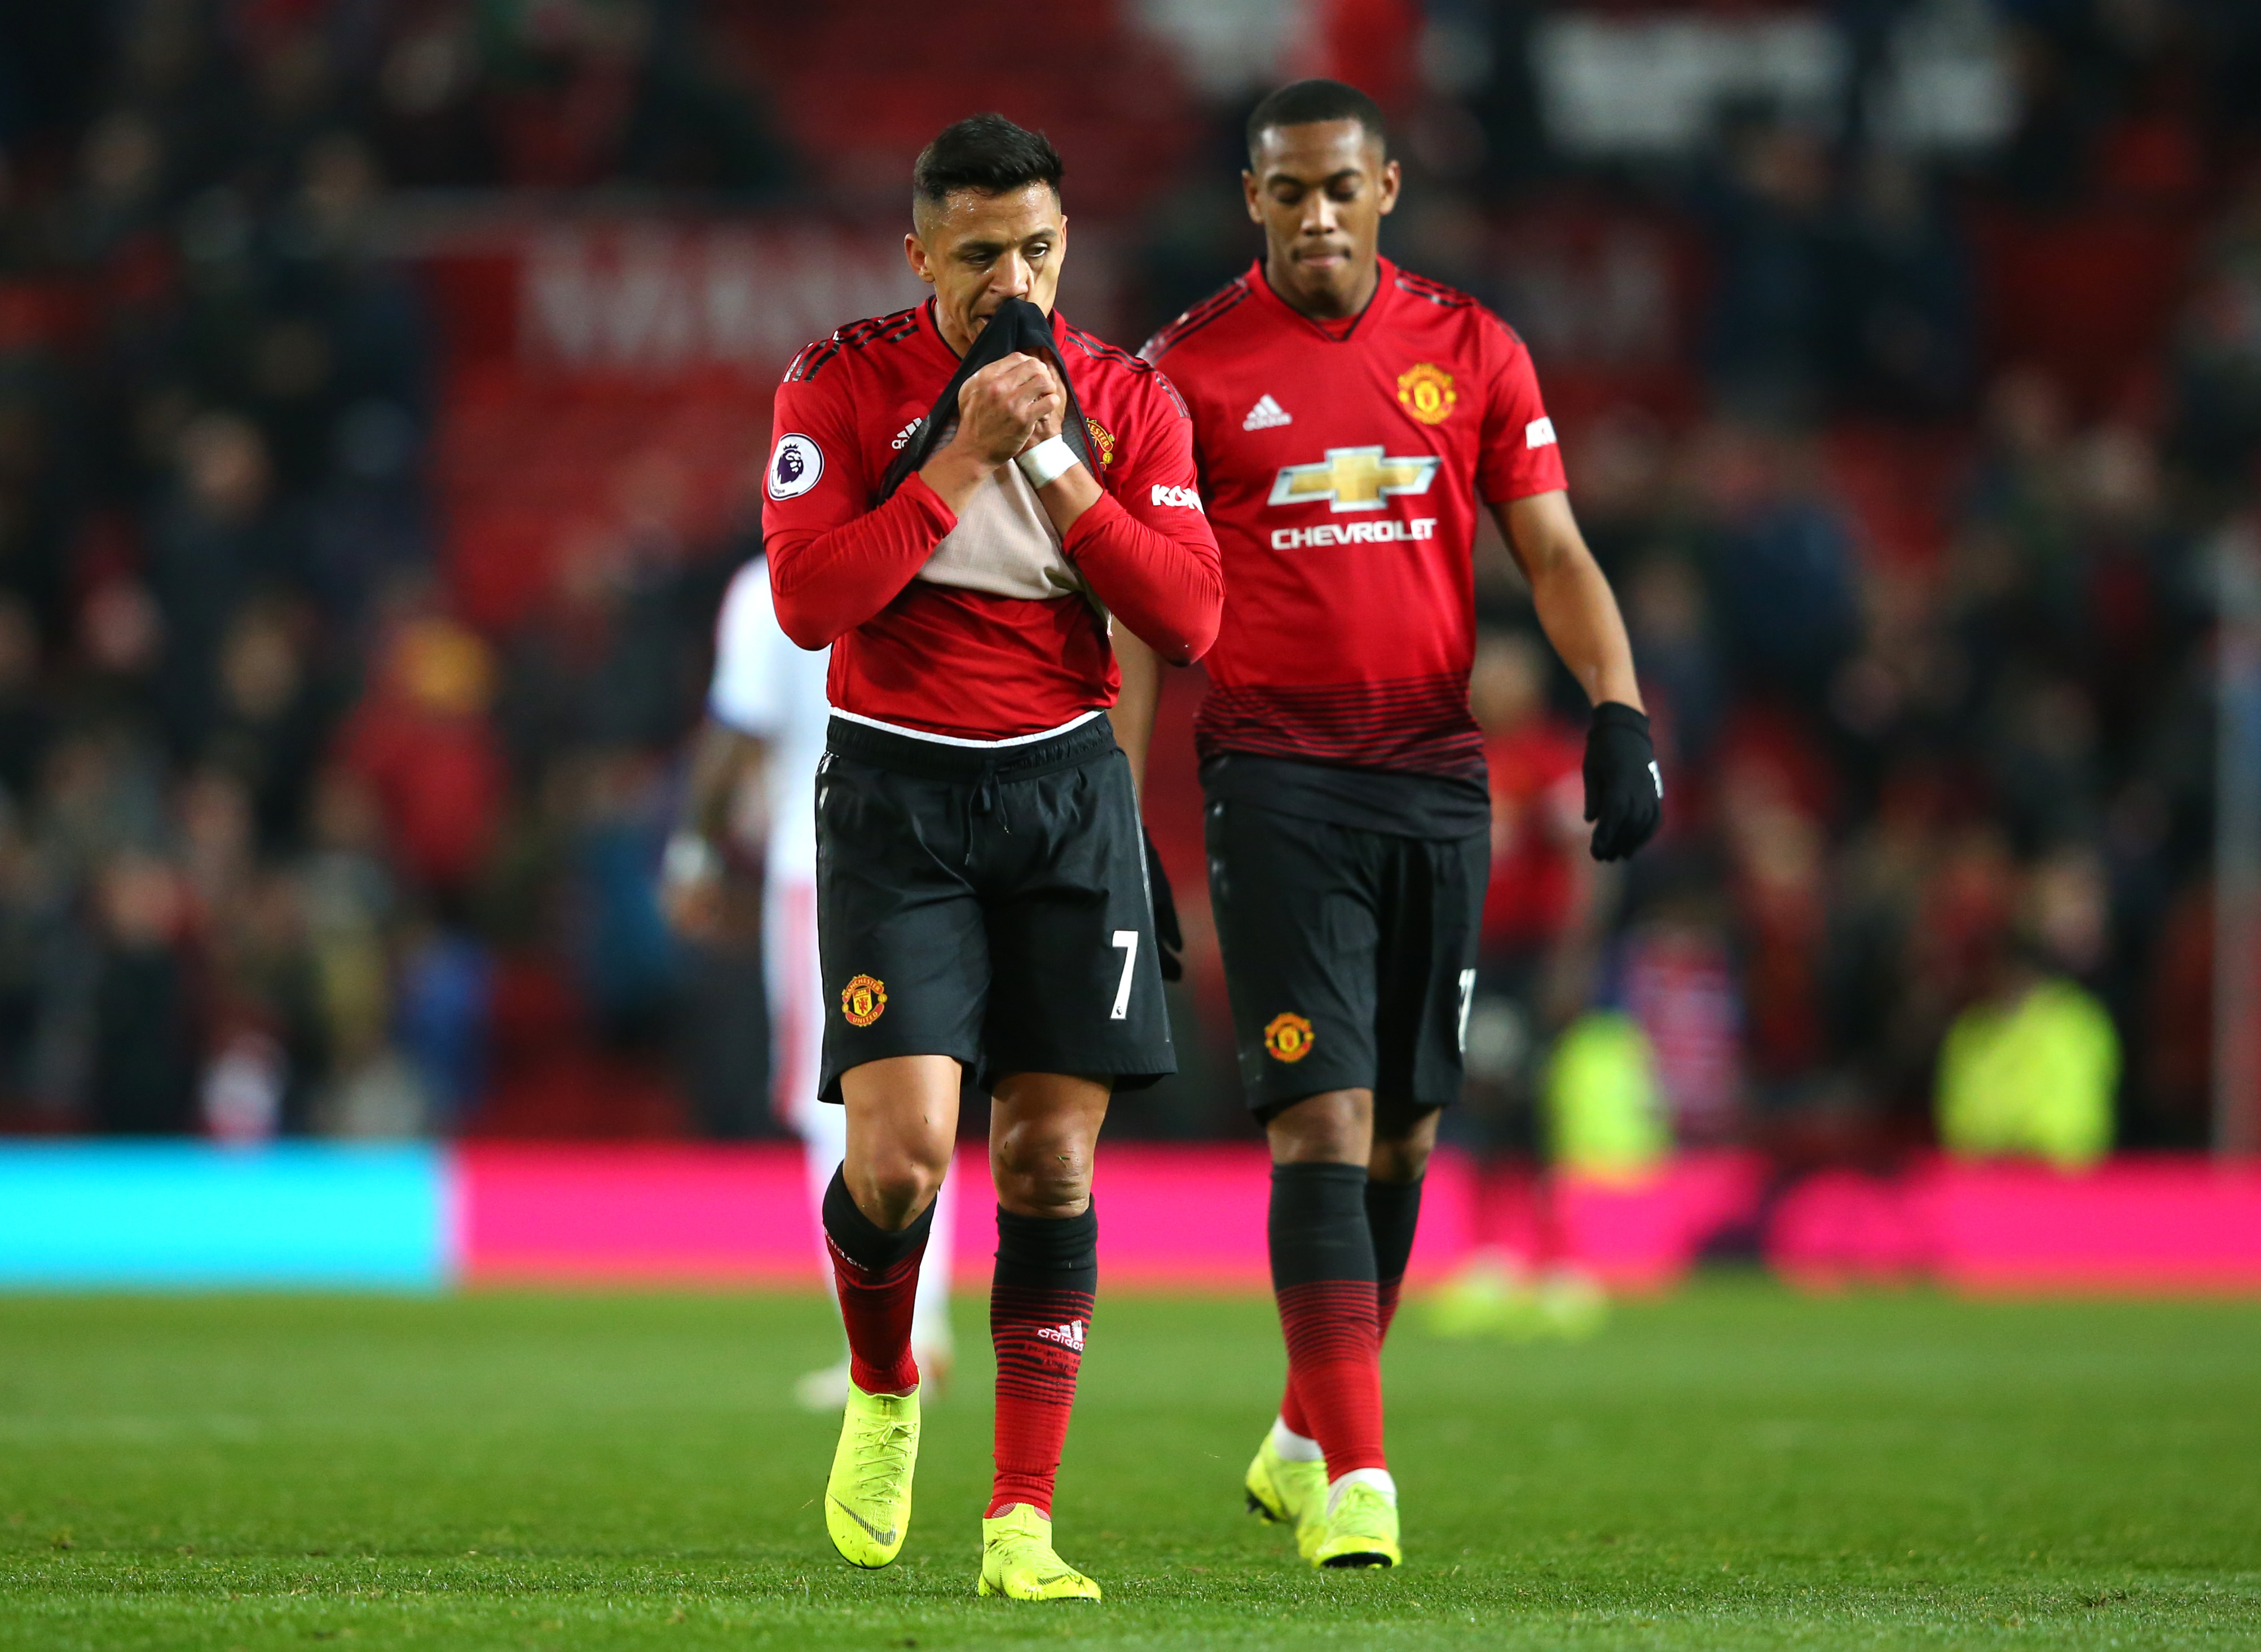 MANCHESTER, ENGLAND - NOVEMBER 24:  Alexis Sanchez and Anthony Martial of Manchester United look dejected following the Premier League match between Manchester United and Crystal Palace at Old Trafford on November 24, 2018 in Manchester, United Kingdom.  (Photo by Alex Livesey/Getty Images)